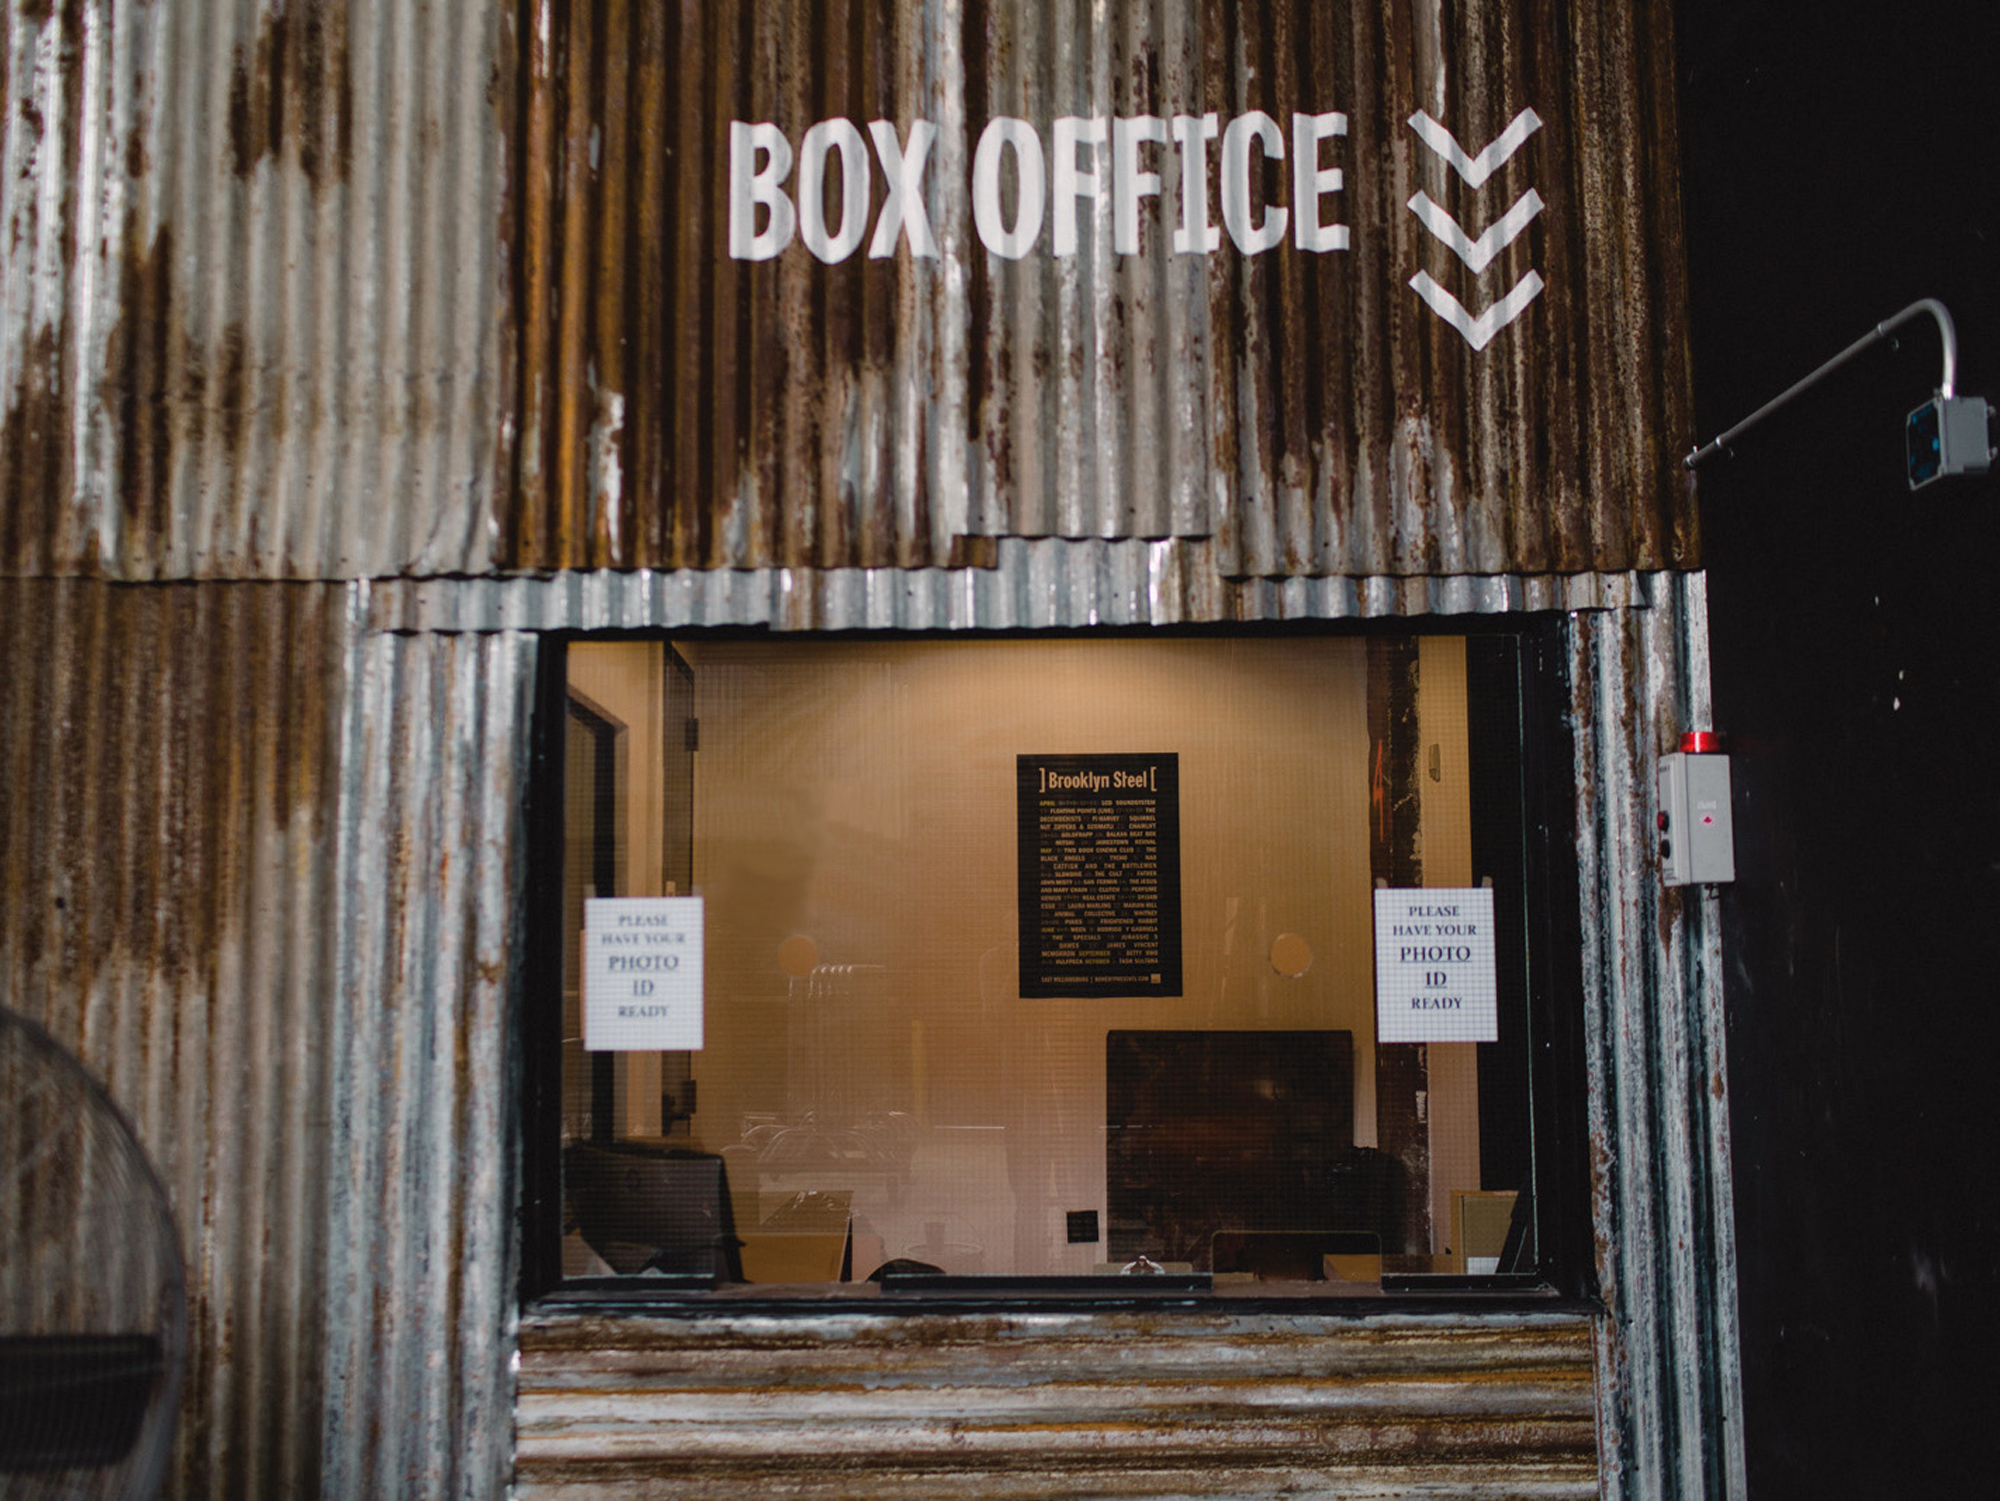 Box office window at Brooklyn Steel with a rustic corrugated metal facade and signage instructing patrons to have photo ID ready.